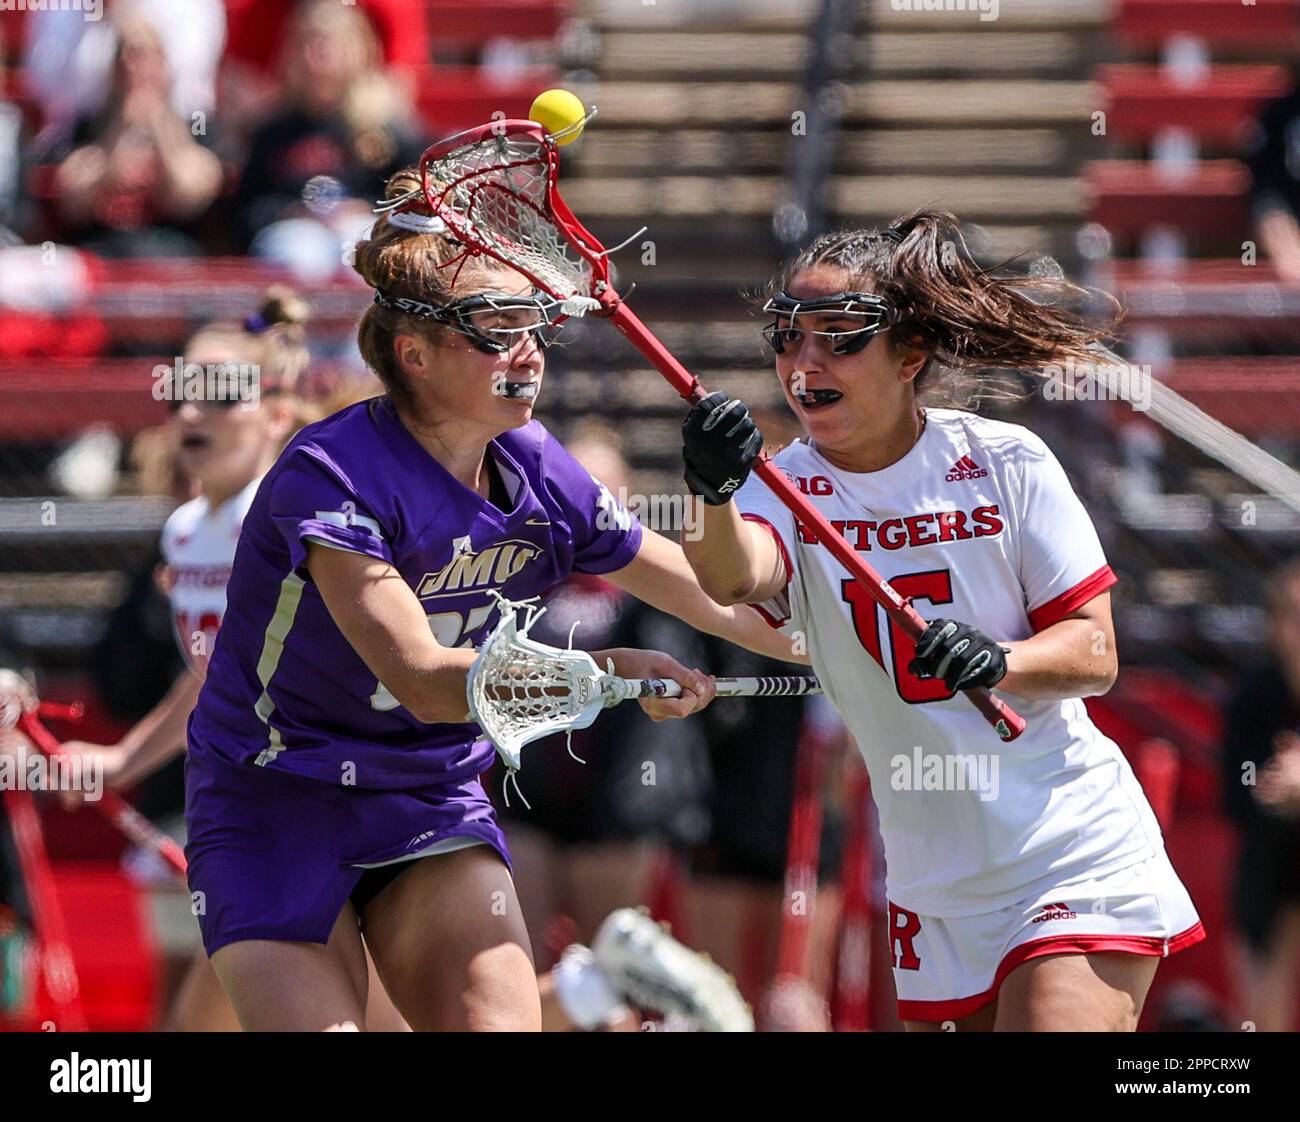 April 23, 2023: Rutgers midfielder Ashley Campo (16) tries to keep control of ball during a NCAA Womens Lacrosse game between James Madison University and the Rutgers Scarlet Knights at SHI Stadium in Piscataway, N.J. Mike Langish/Cal Sport Media. Stock Photo